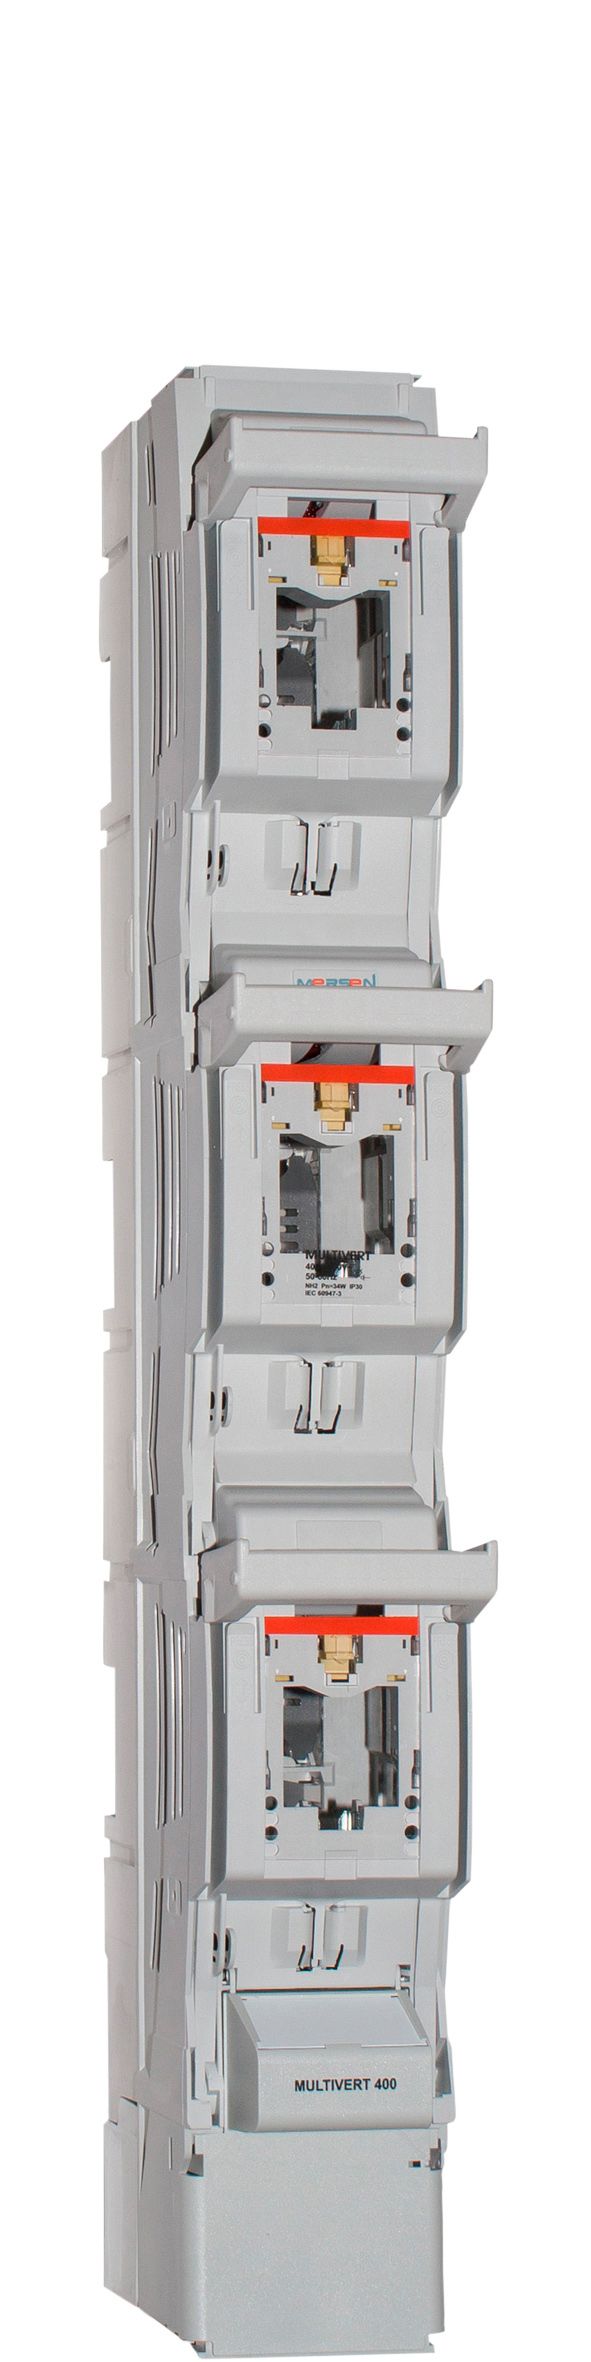 A1023201 - MULTIVERT 400A, single pole switching V-terminal